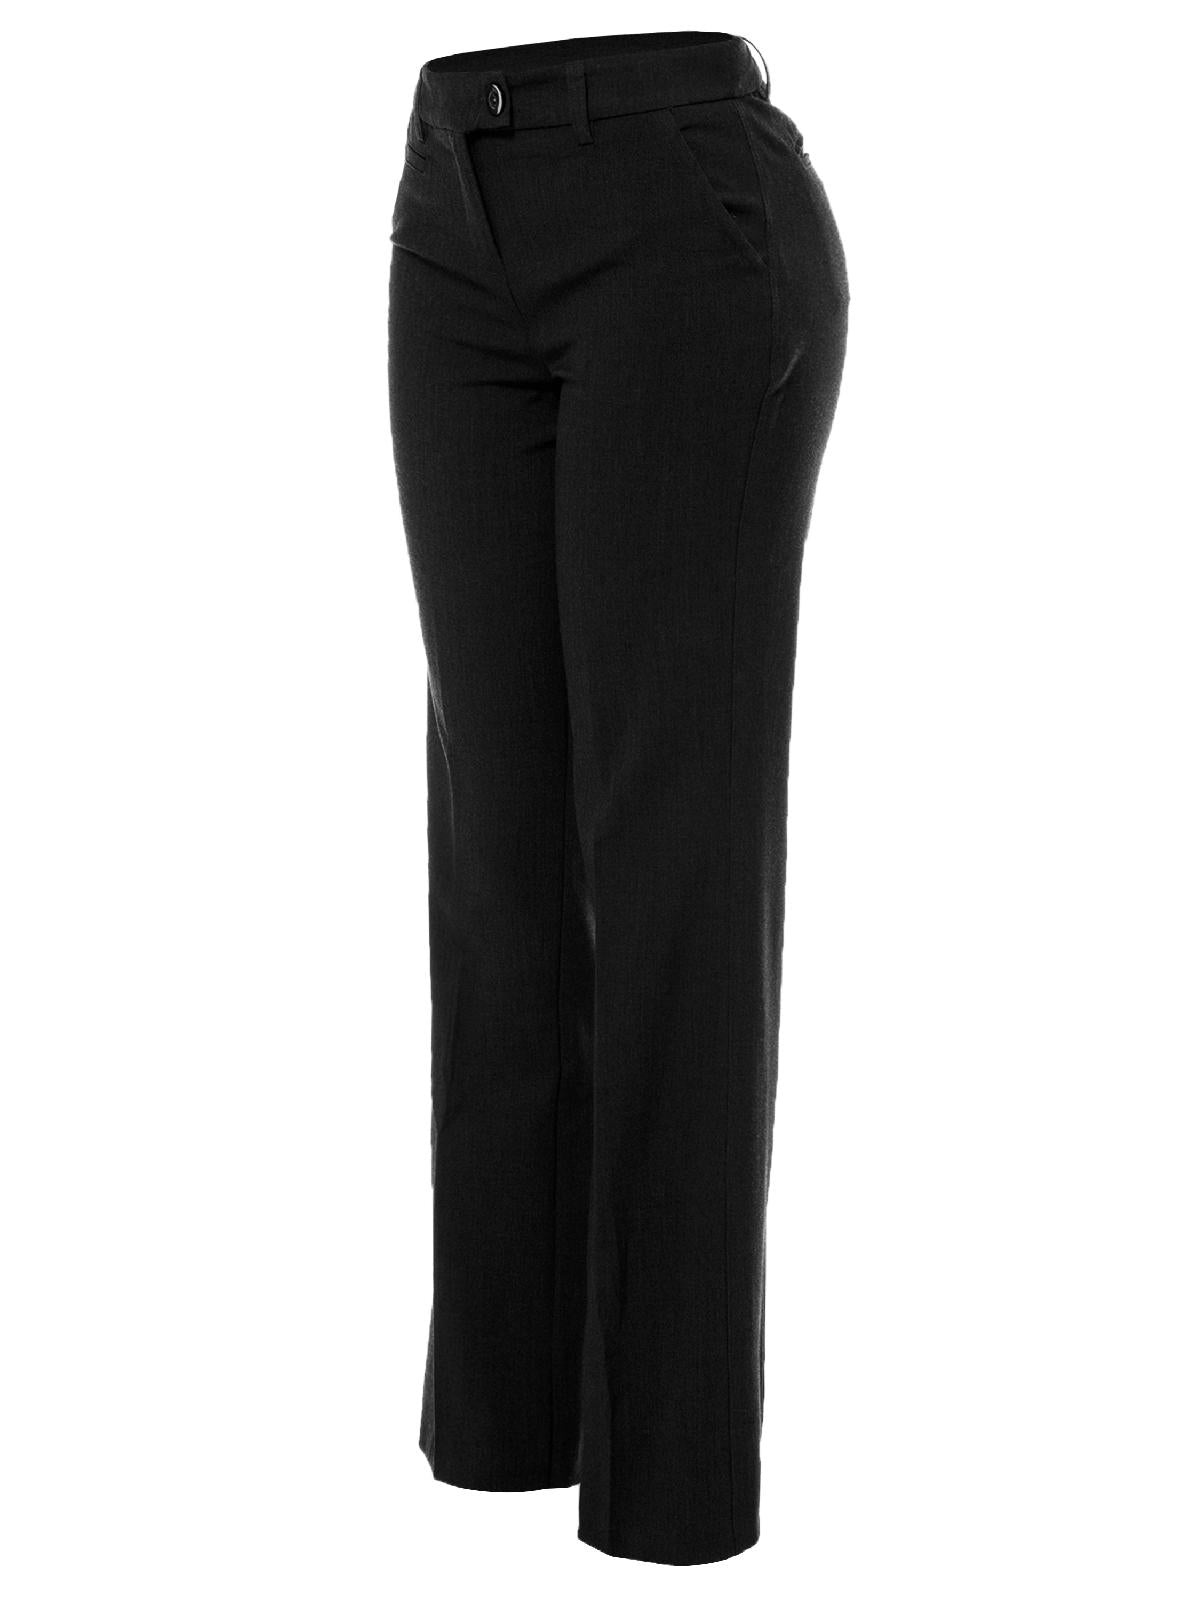 Solid Regular Rise Boot-Cut Stretch Office Slacks with Back and Side Pockets